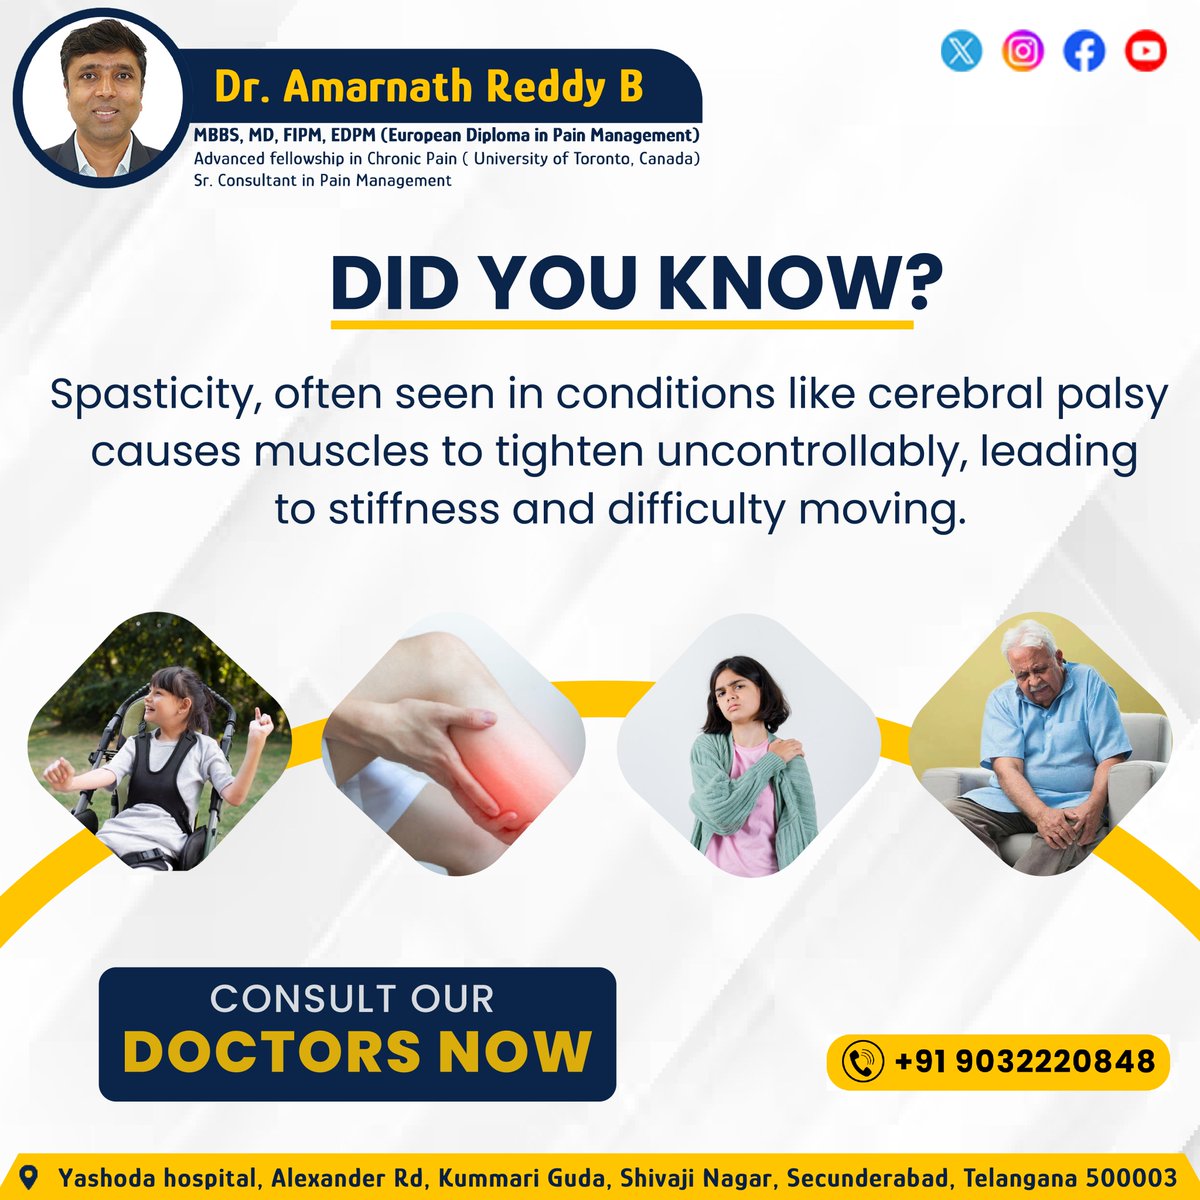 Feeling trapped in your own body due to spasticity is incredibly painful. Imagine muscles tightening uncontrollably, making every movement a struggle. But there's hope. At Dr. Amarnath Reddy B's Pain Management Department, we understand this agony.

#musclestightening